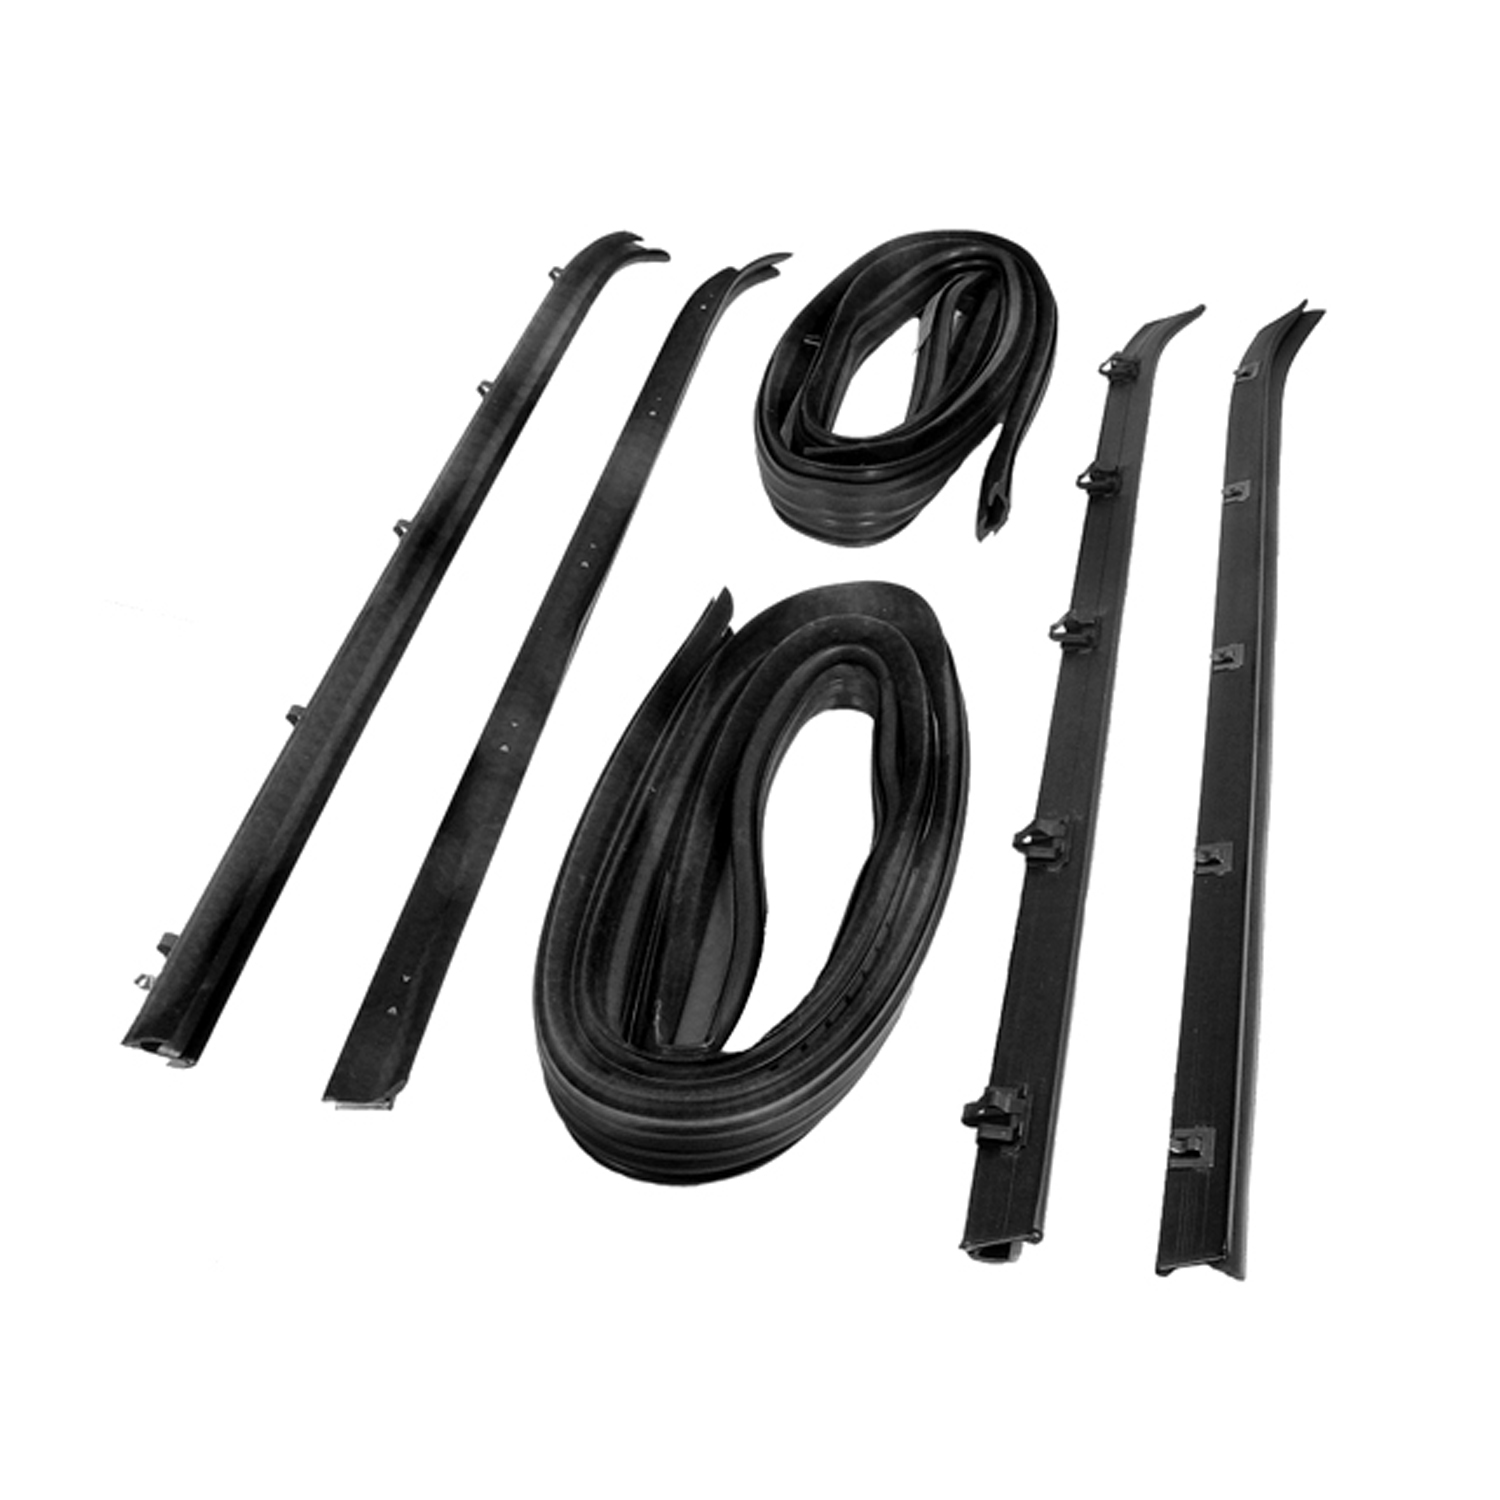 1977 Chevrolet C20 Suburban Window Channel and Sweeper Kit, for Front Doors-WC 5900-15